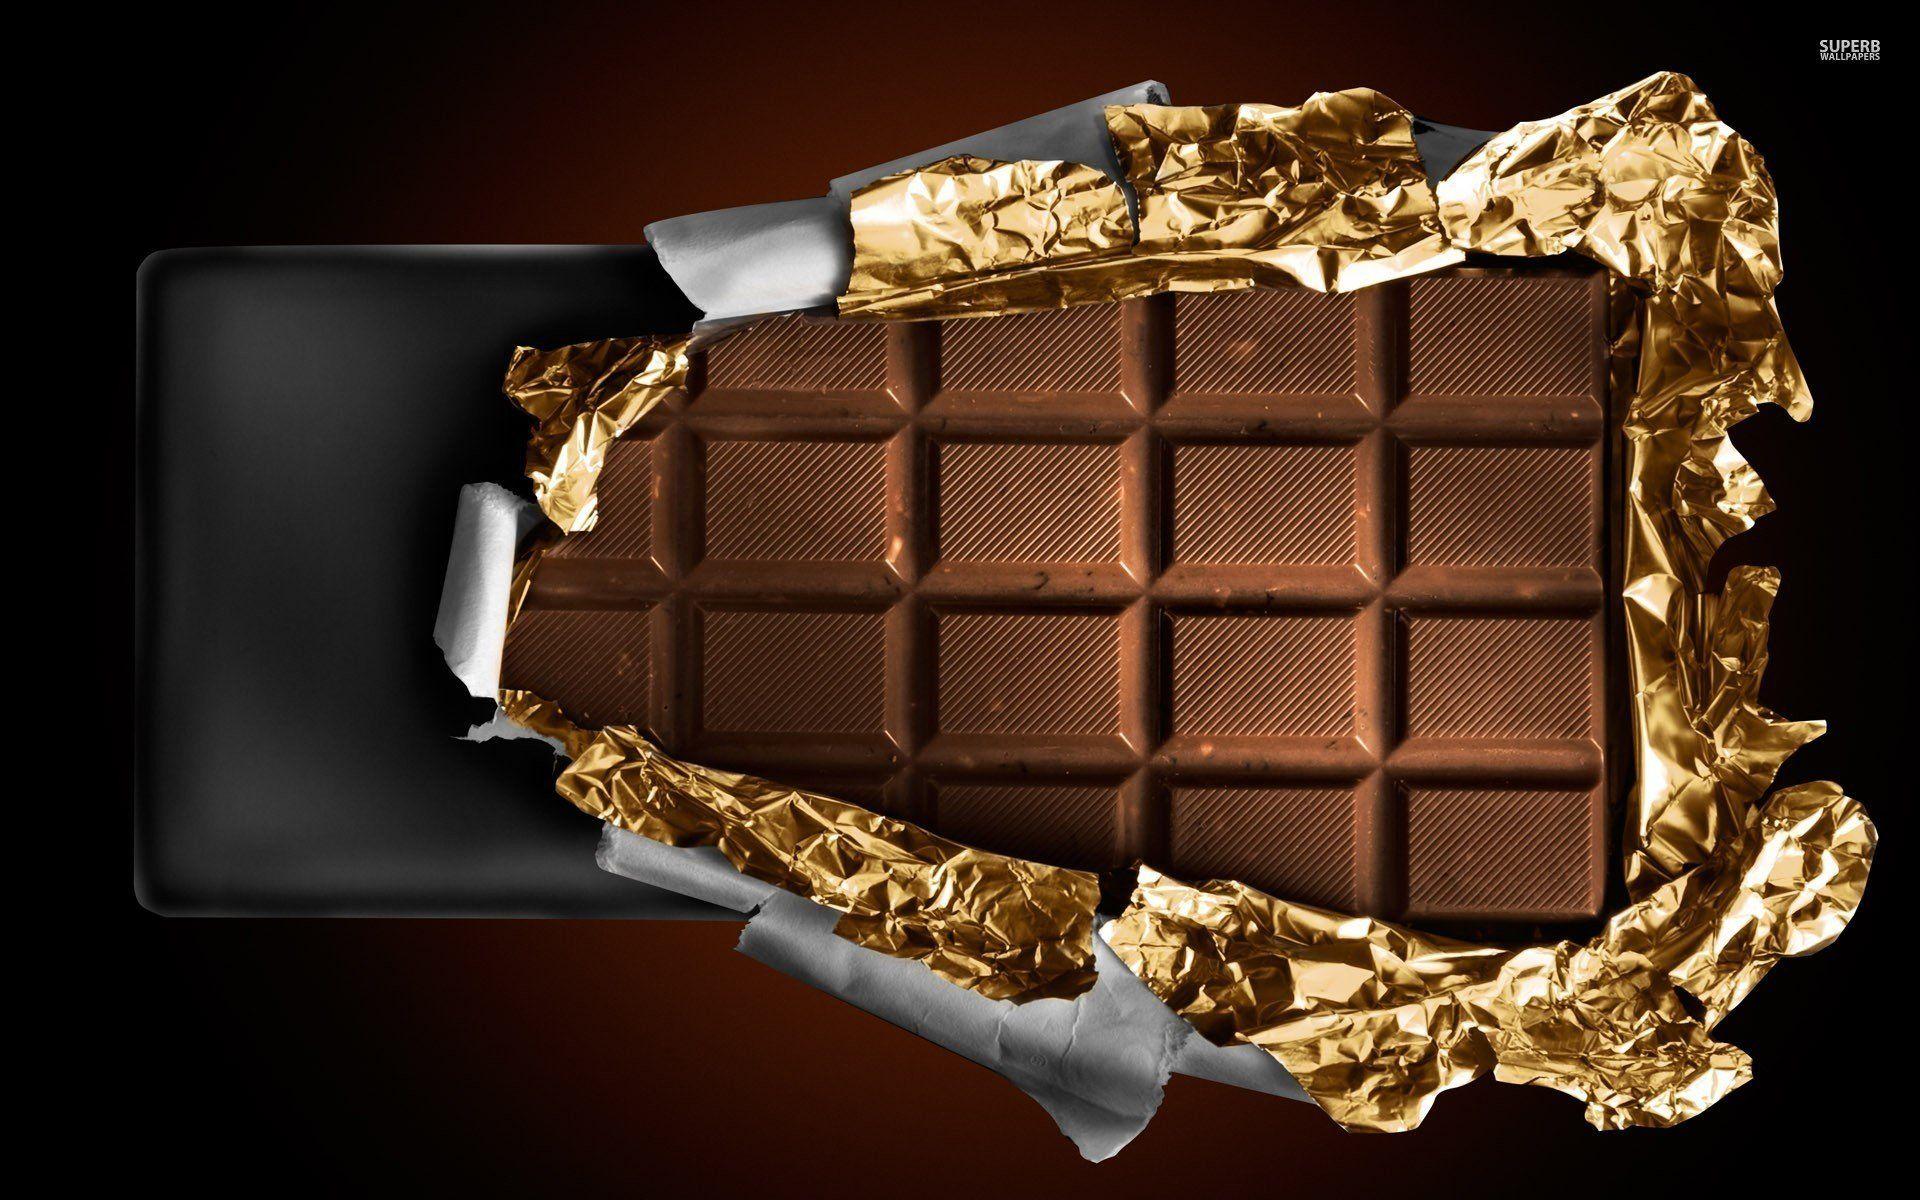 Free Chocolate Image for Free (2MTX Free Chocolate Wallpaper)